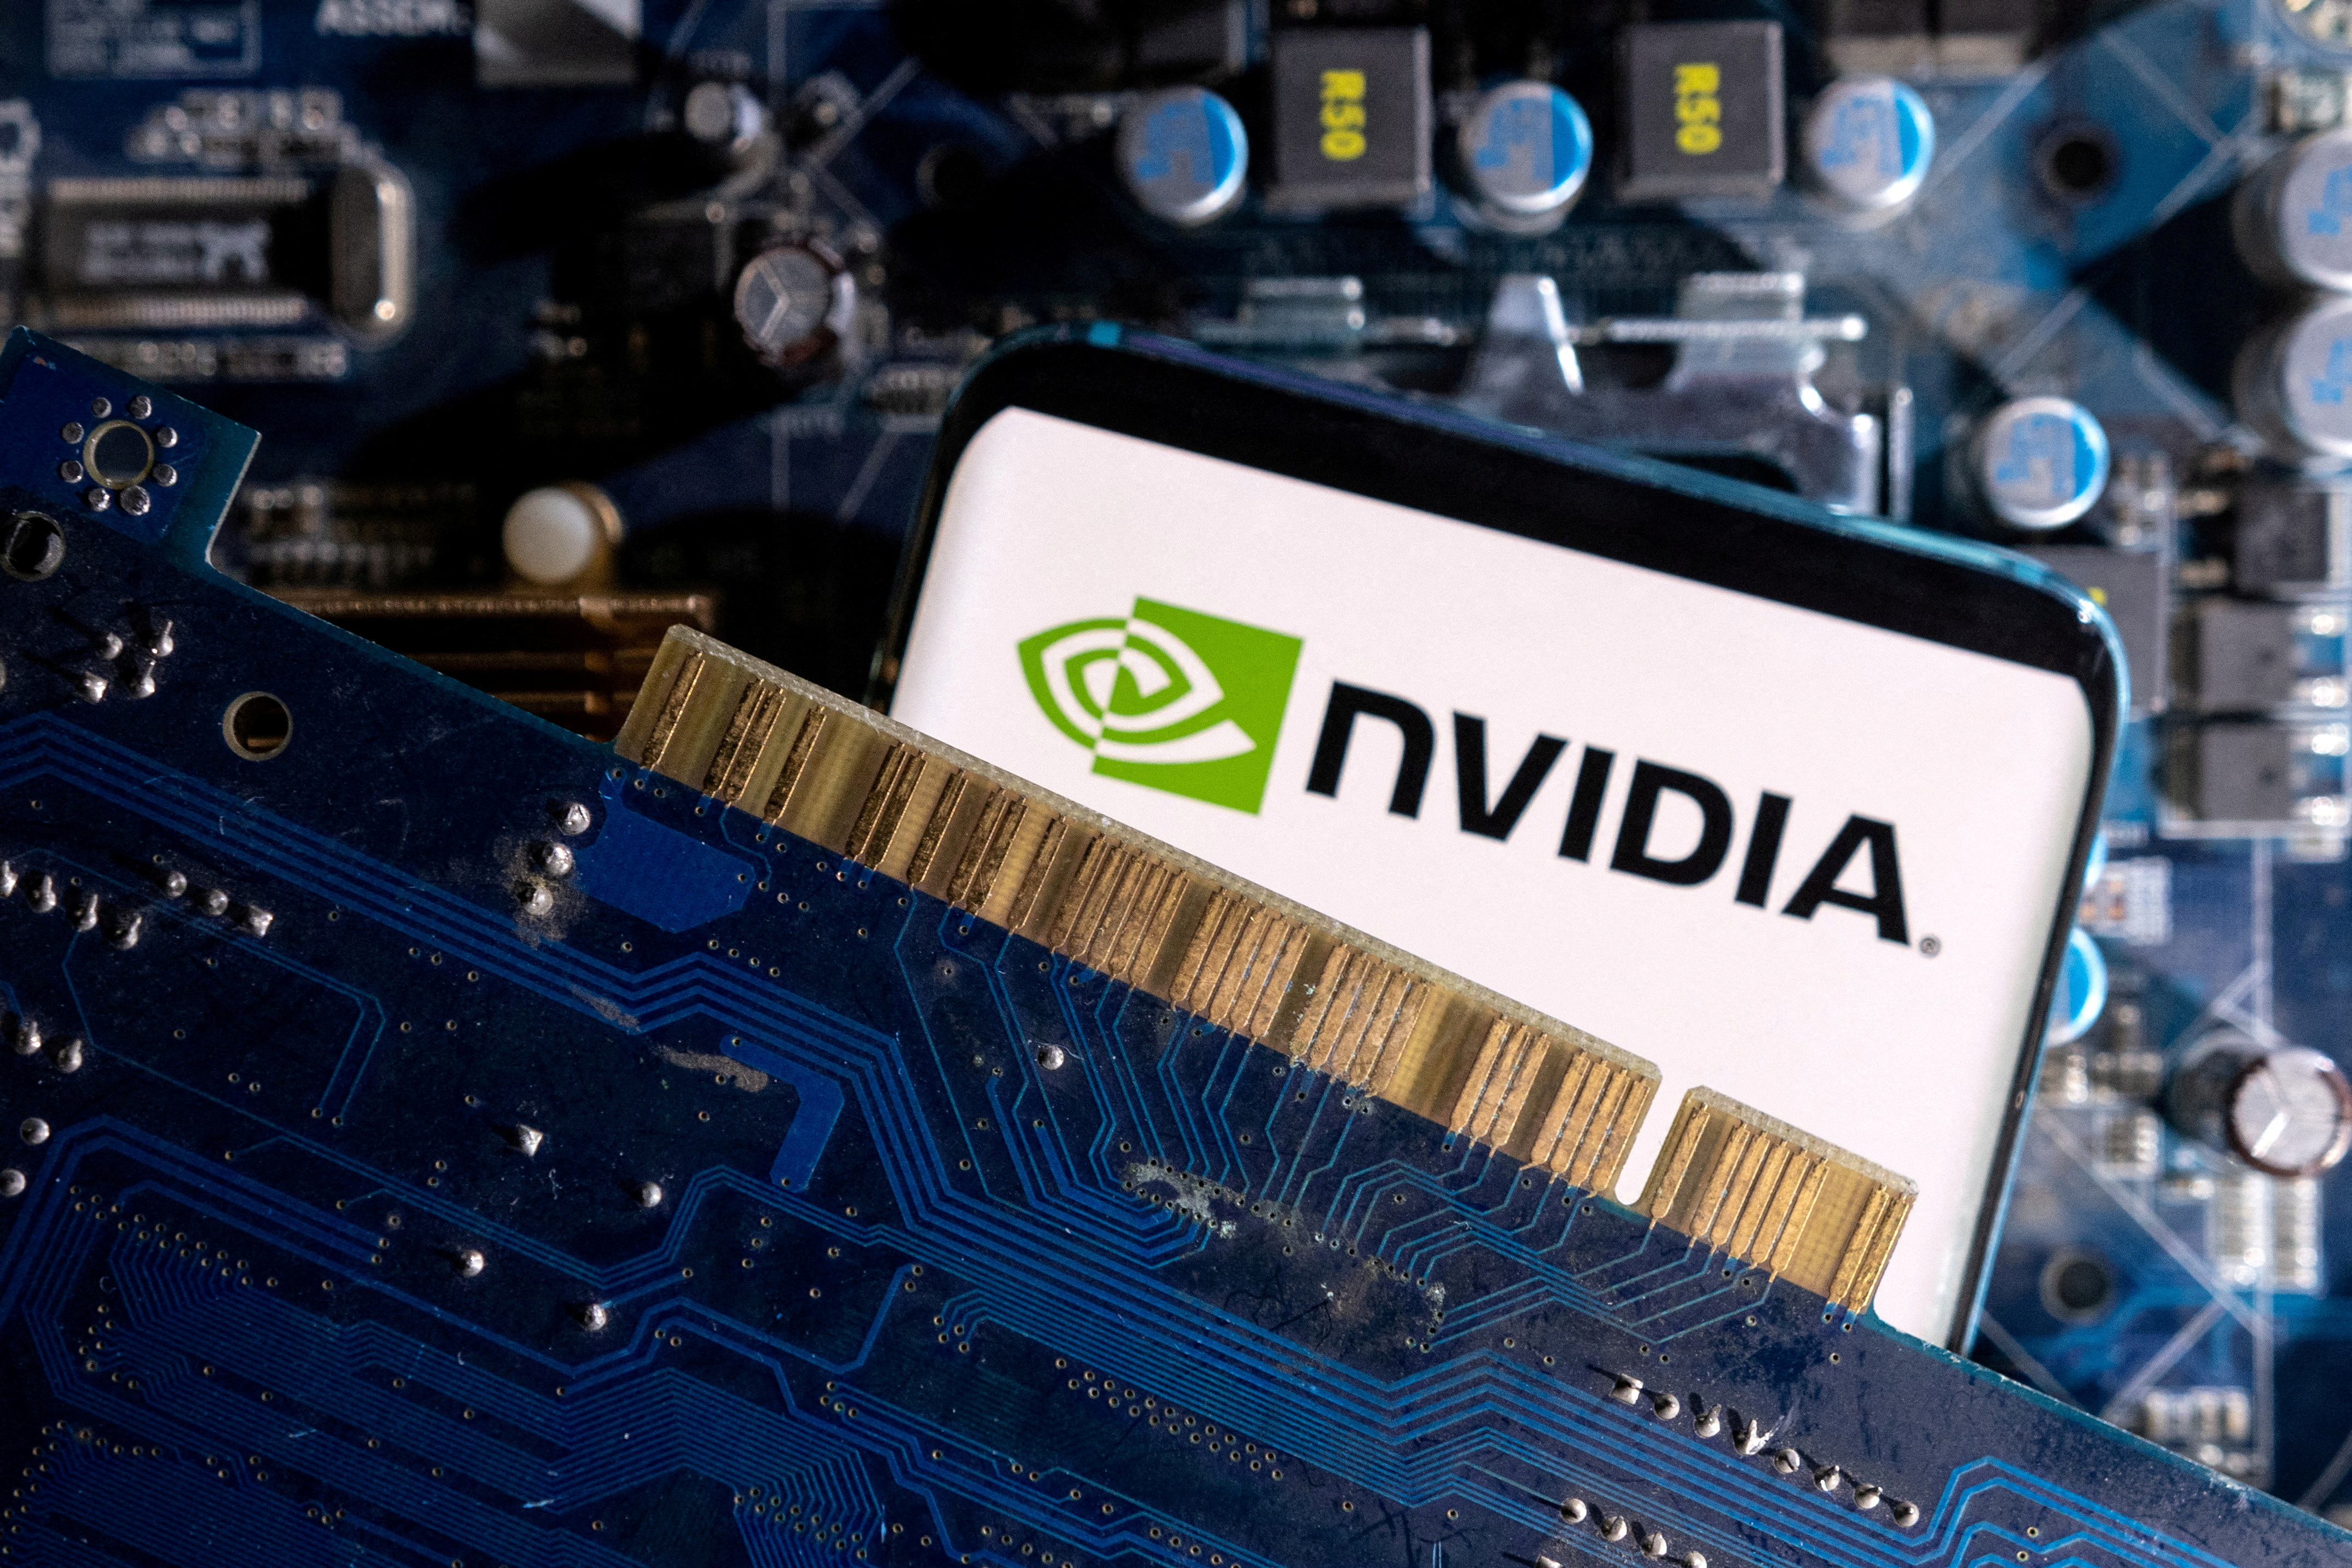 Nvidia plans to release three new chips for China - analysts | Reuters